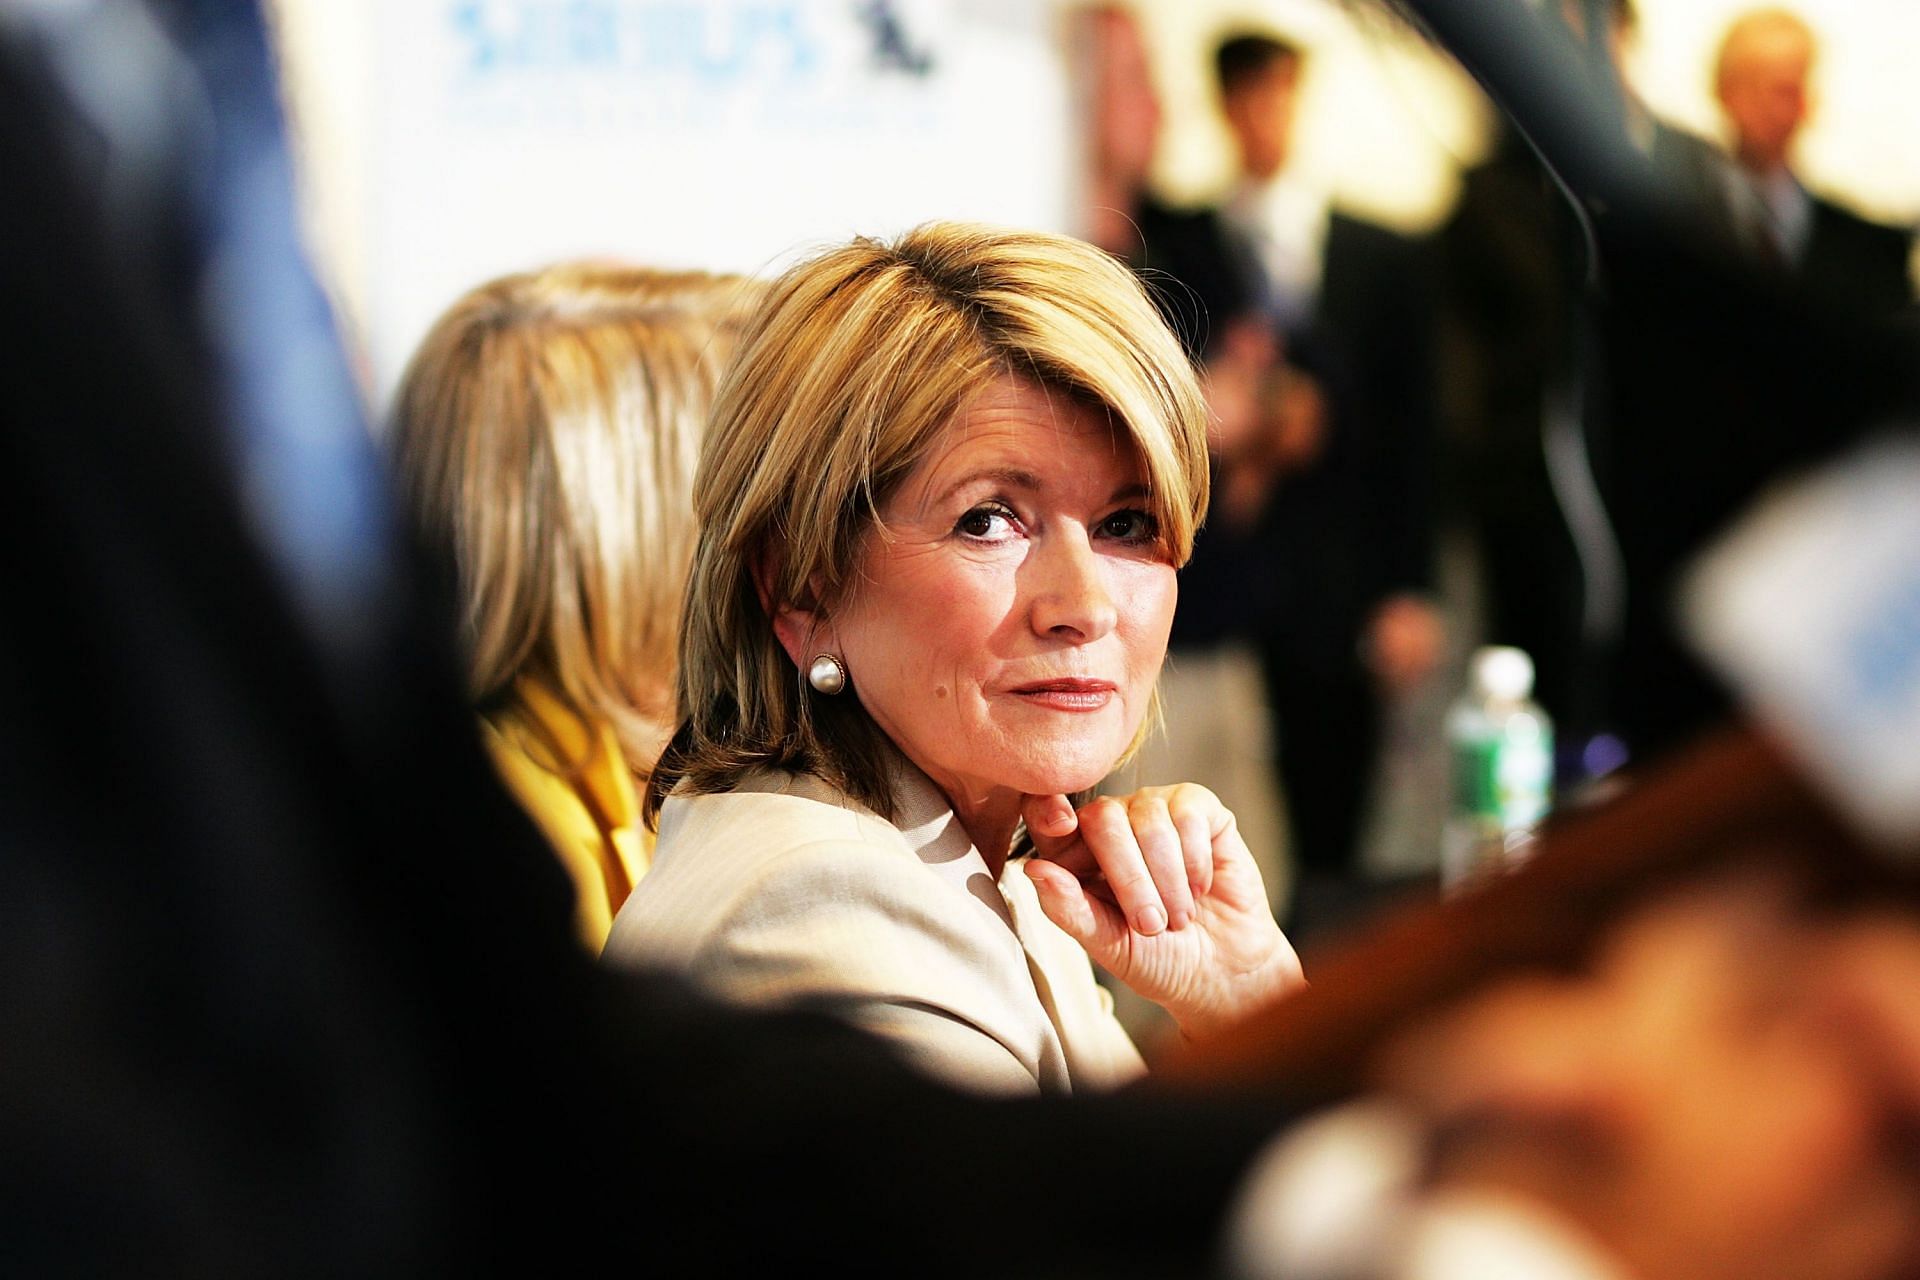 Martha Stewart revealed she could not take Anthony Hopkins to her Maine house because she kept picturing him as Hannibal Lecter (Image via Getty Images/David Turnley)